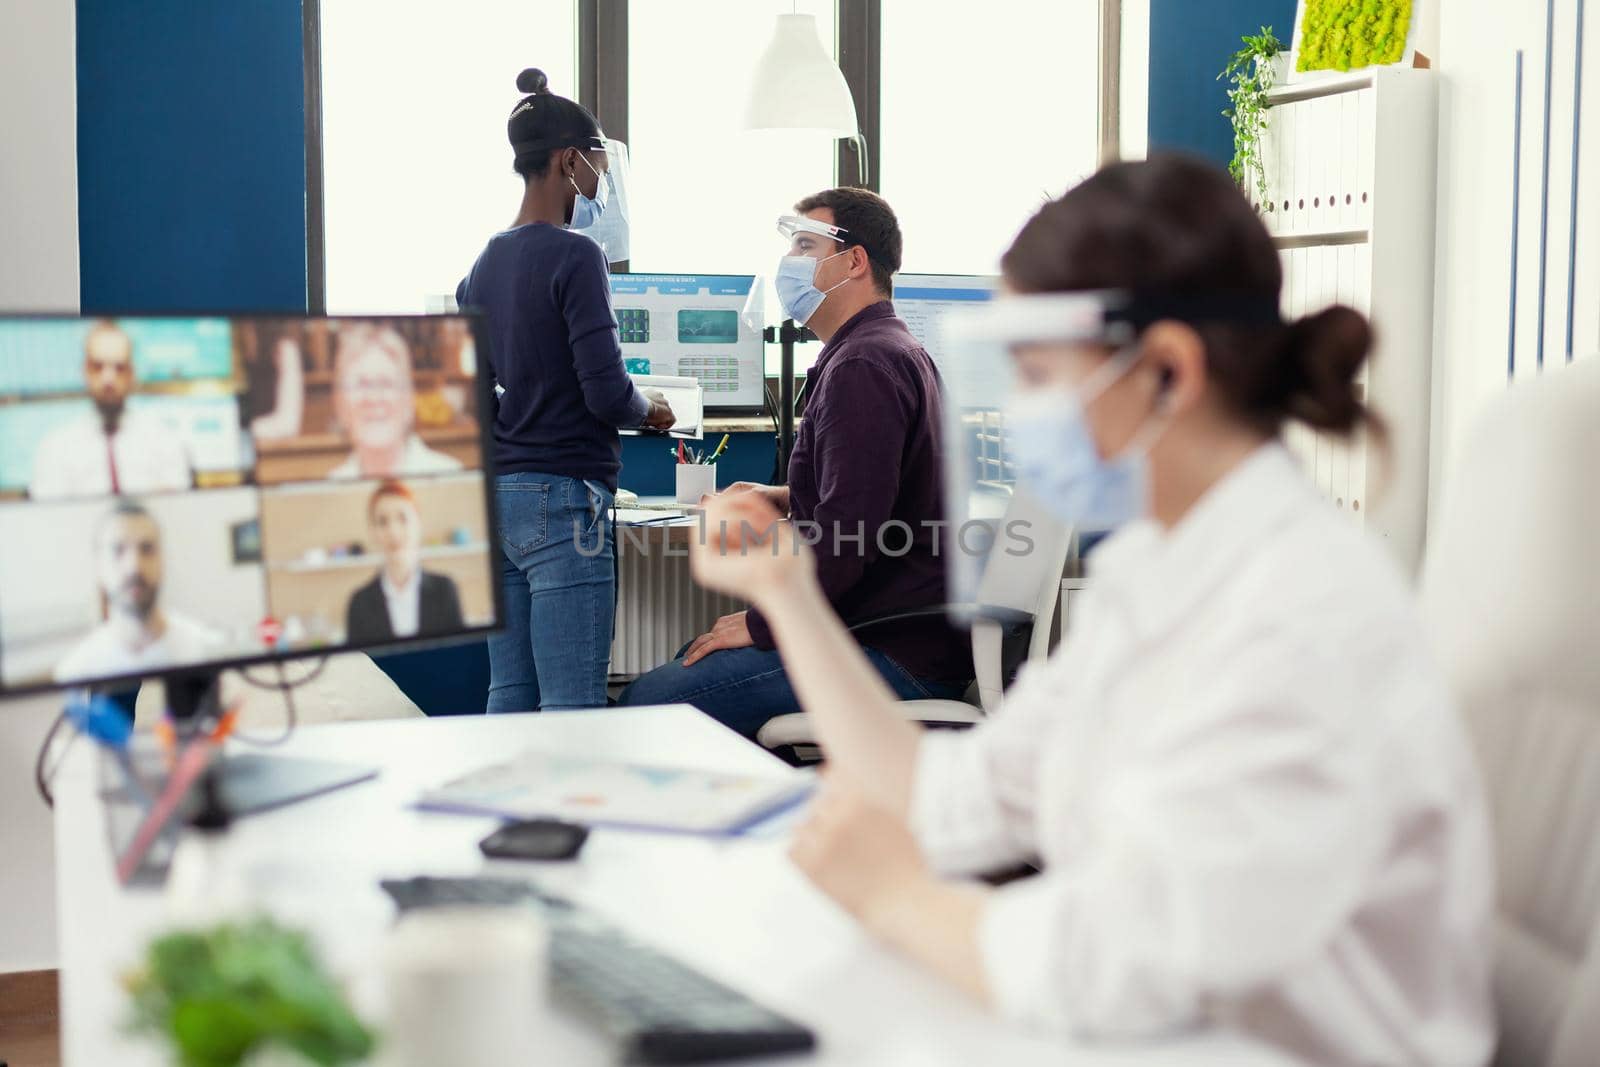 Man discussing with african coworker about a project at workplace wearing face mask against covid. Entrepreneur having videocall while colleagues working respecting social distance during global pandemic.